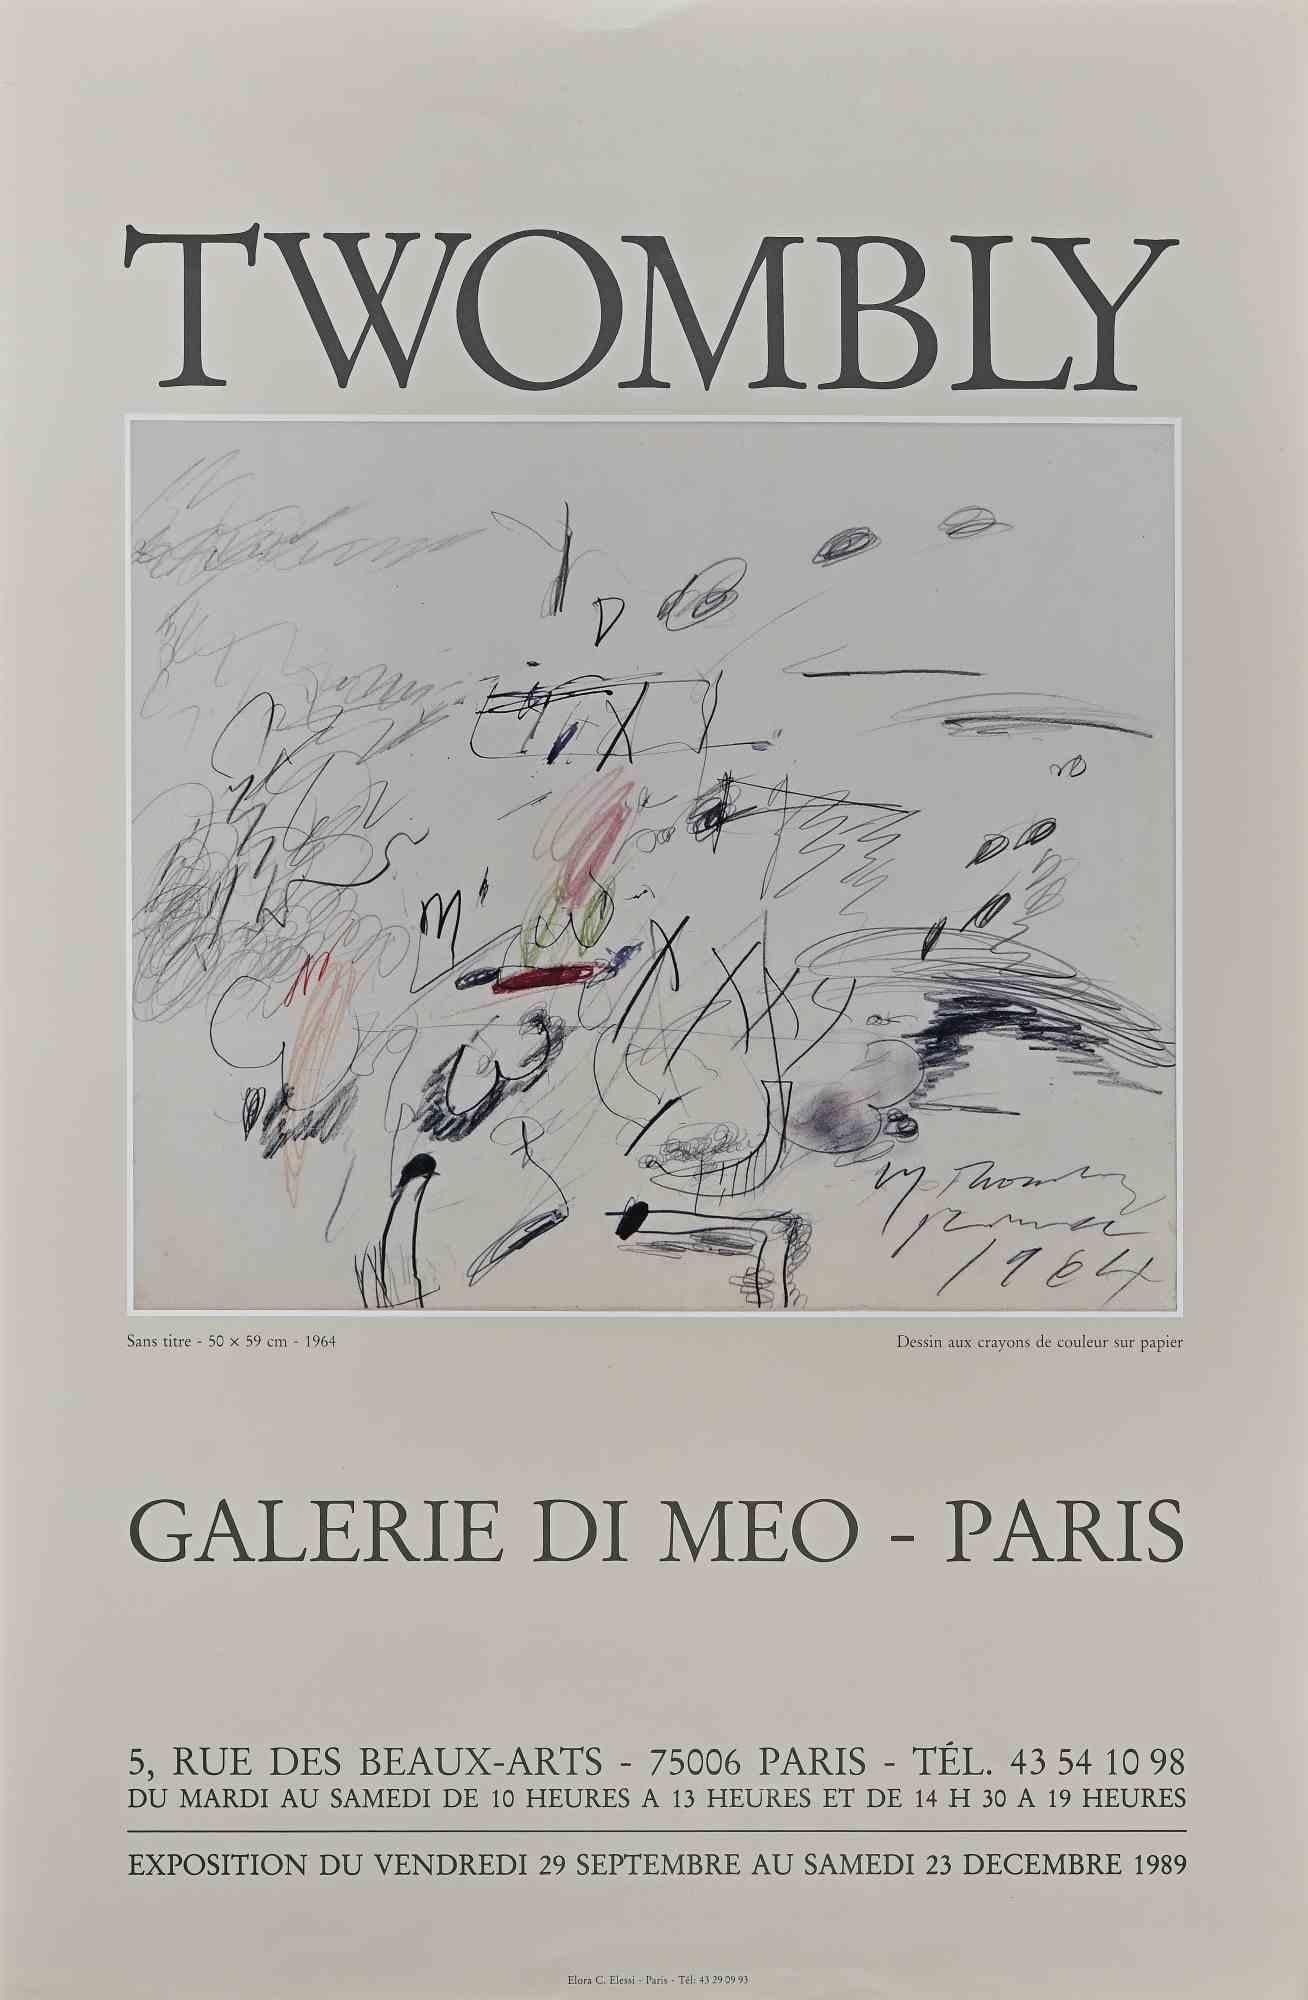 Cy Twombly Abstract Print - Twombly Exhibition - Galerie Di Meo - 2003